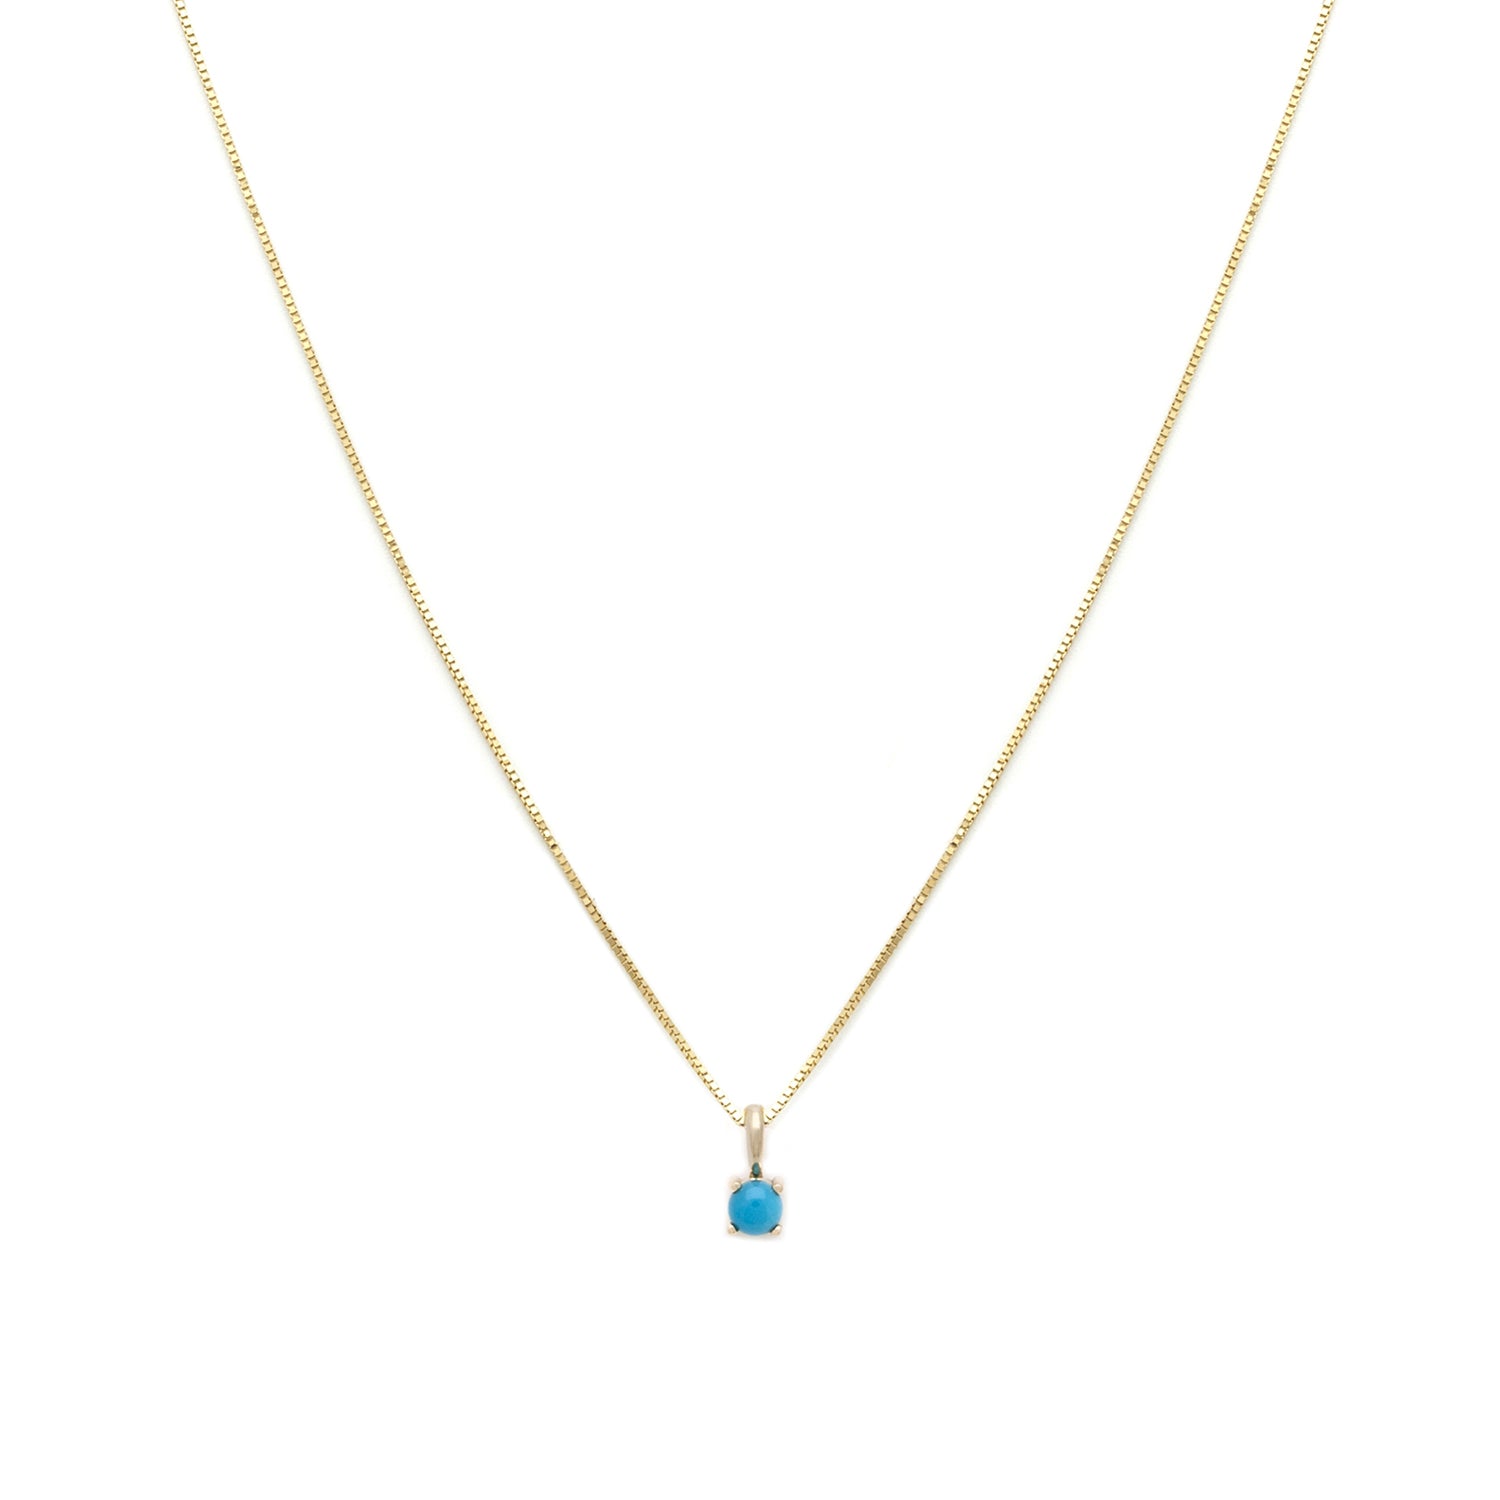 Element Necklace | 14k Gold & Turquoise